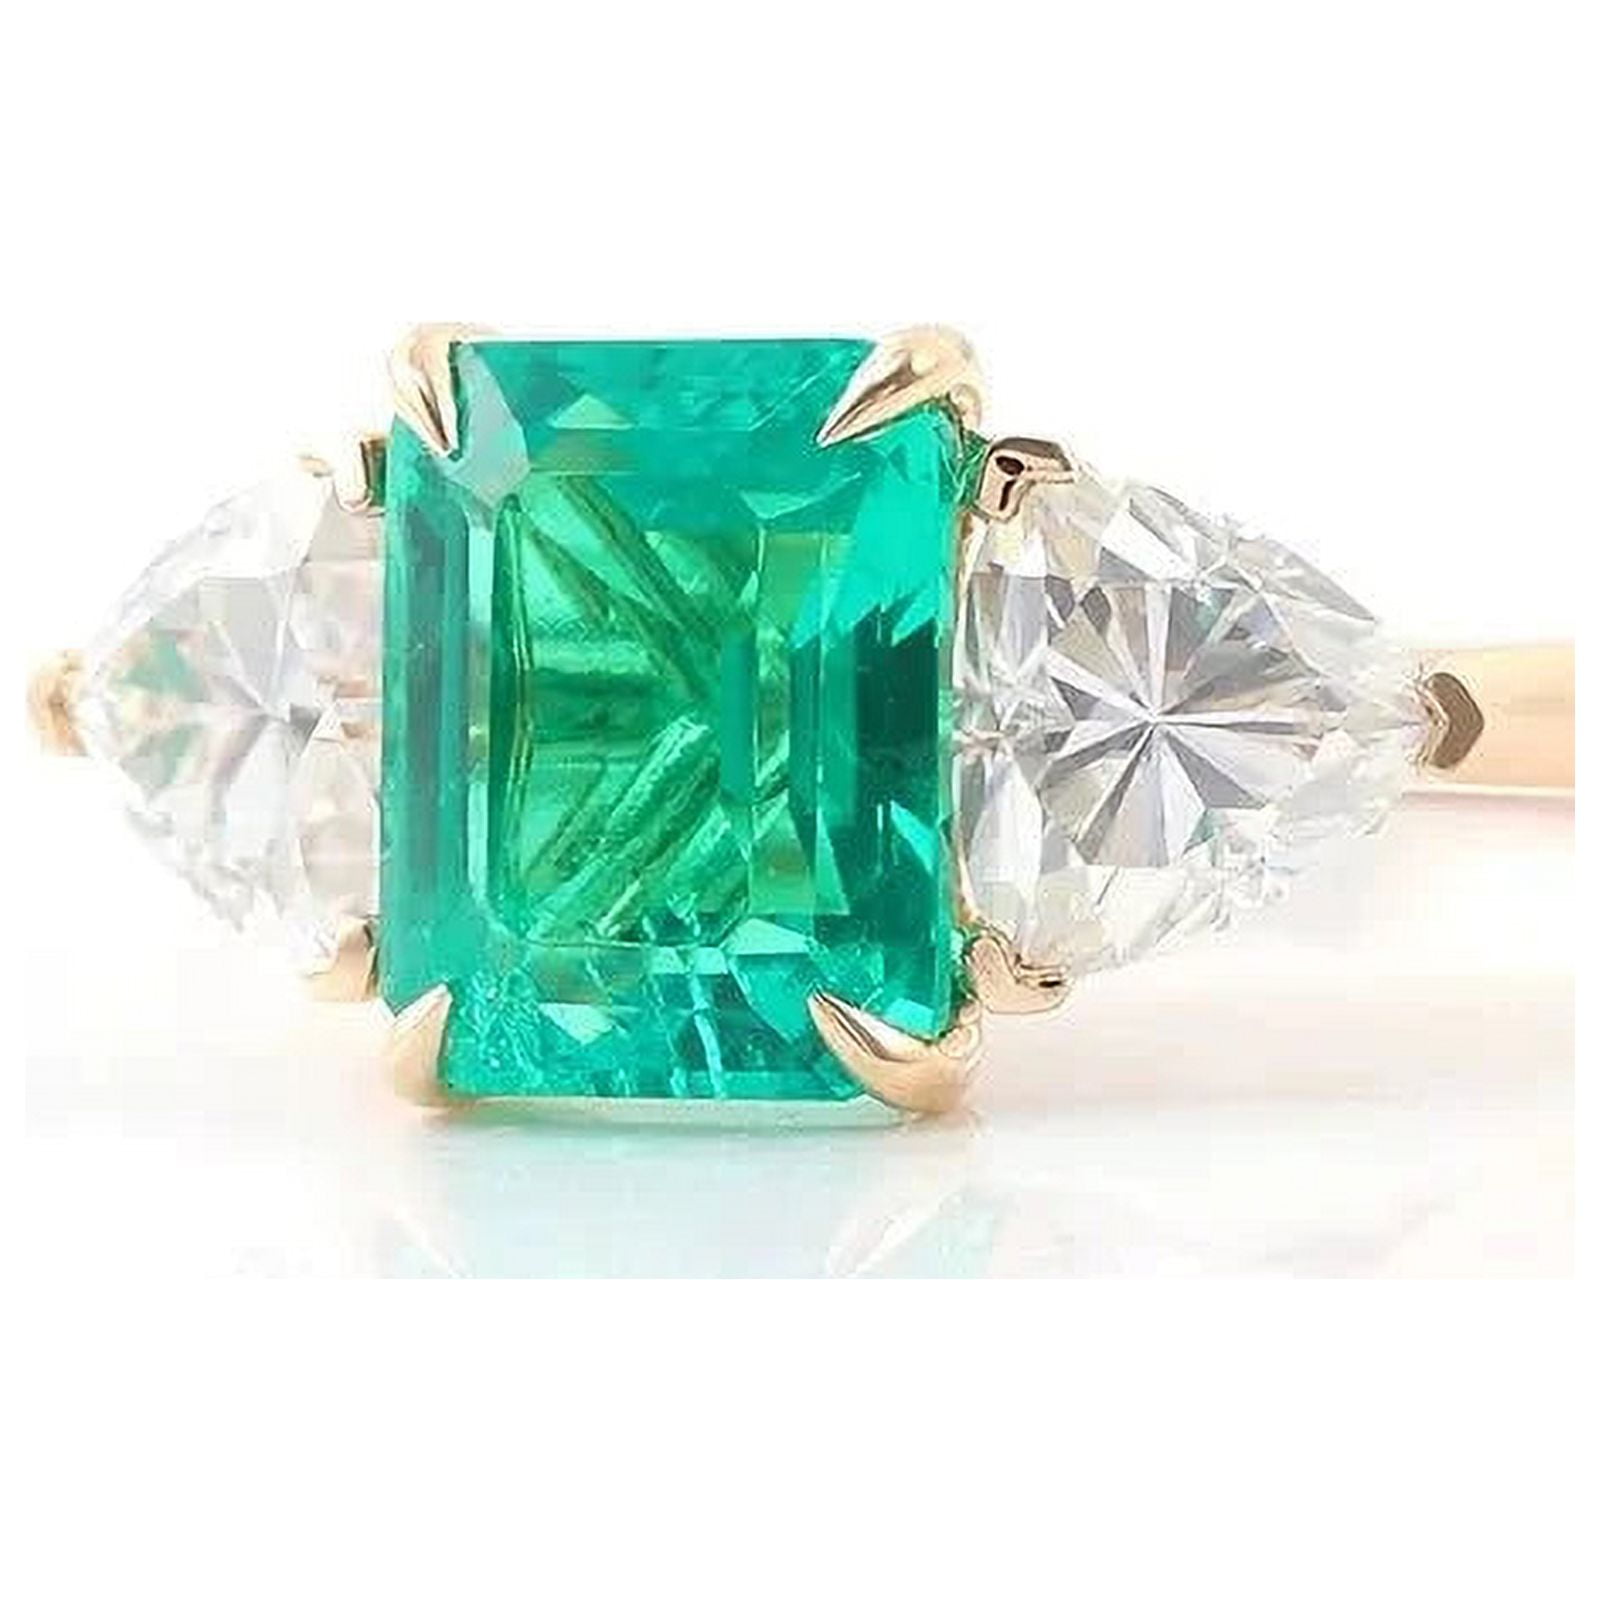 14K White Gold Ring Featuring an Emerald and Diamonds | Troy Shoppe  Jewellers